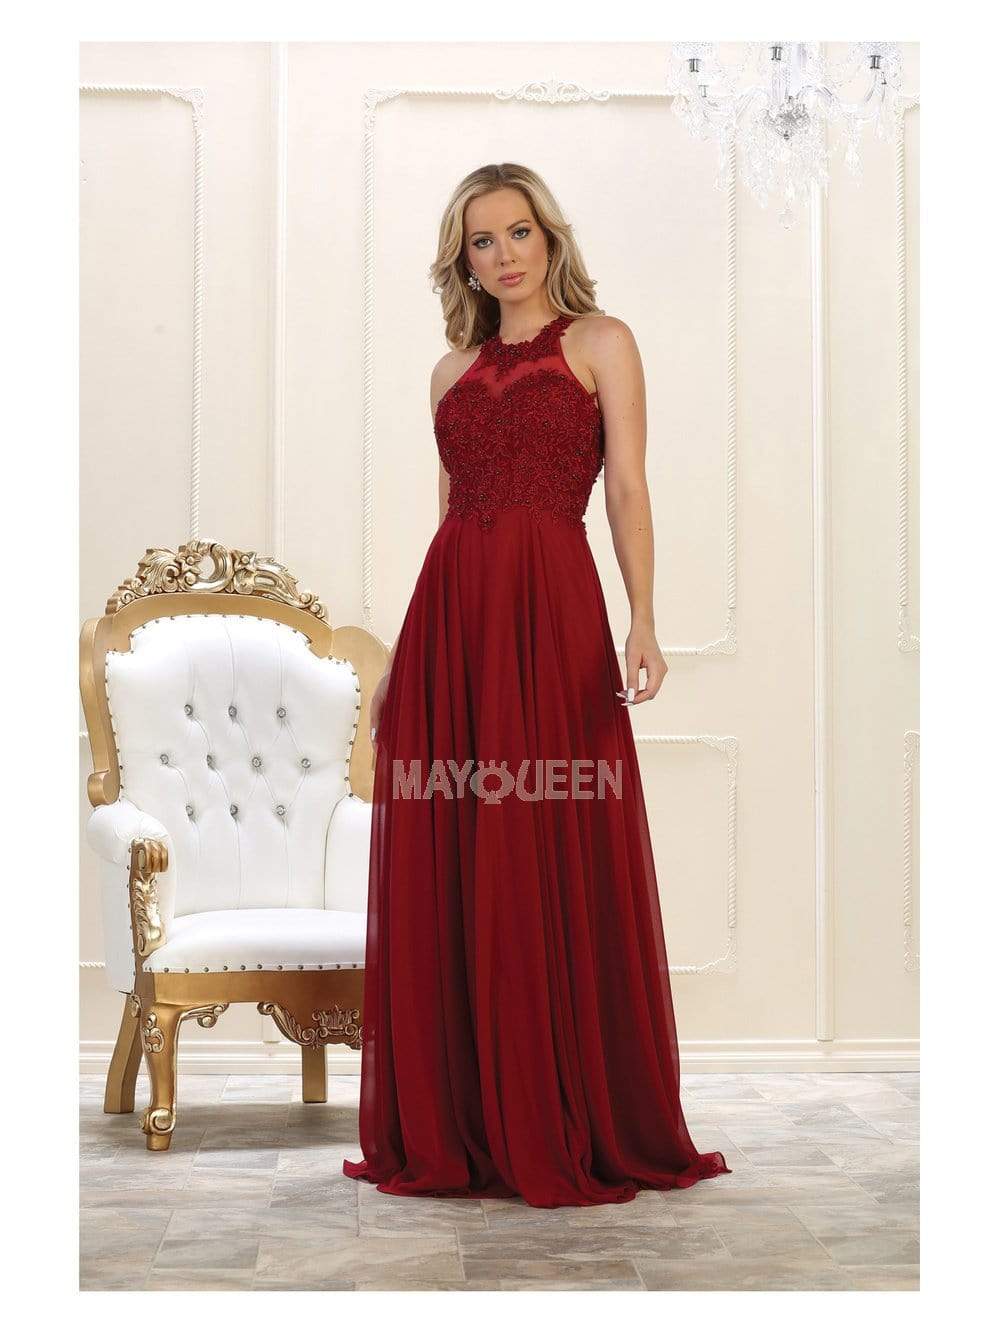 May Queen - MQ1557 Embroidered Halter Neck A-line Dress Bridesmaid Dresses 4 / Burgundy